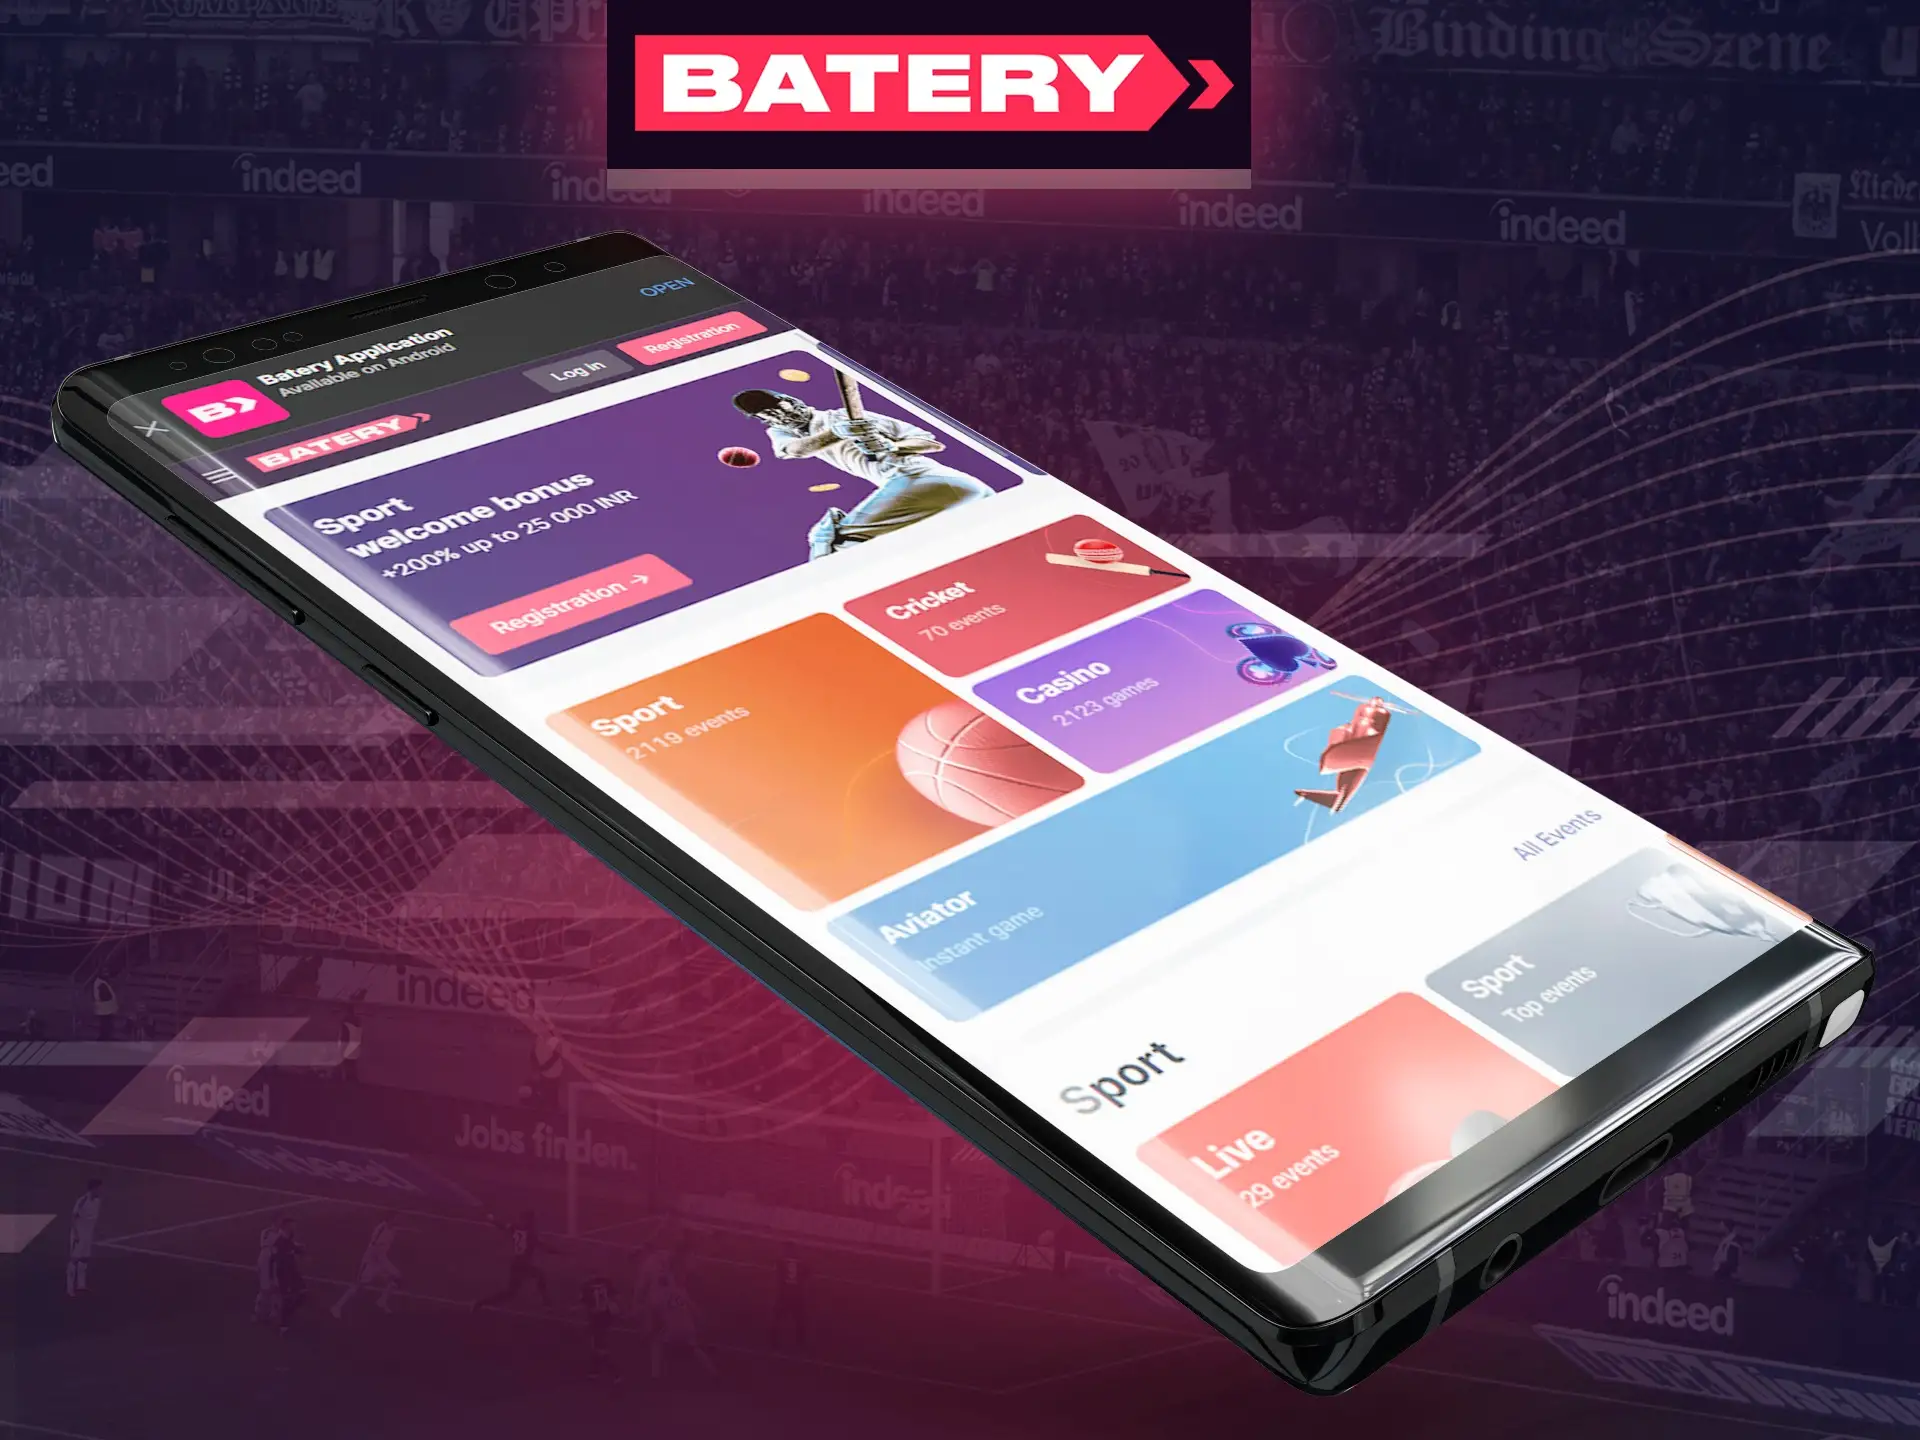 Visit Batery website using mobile device.